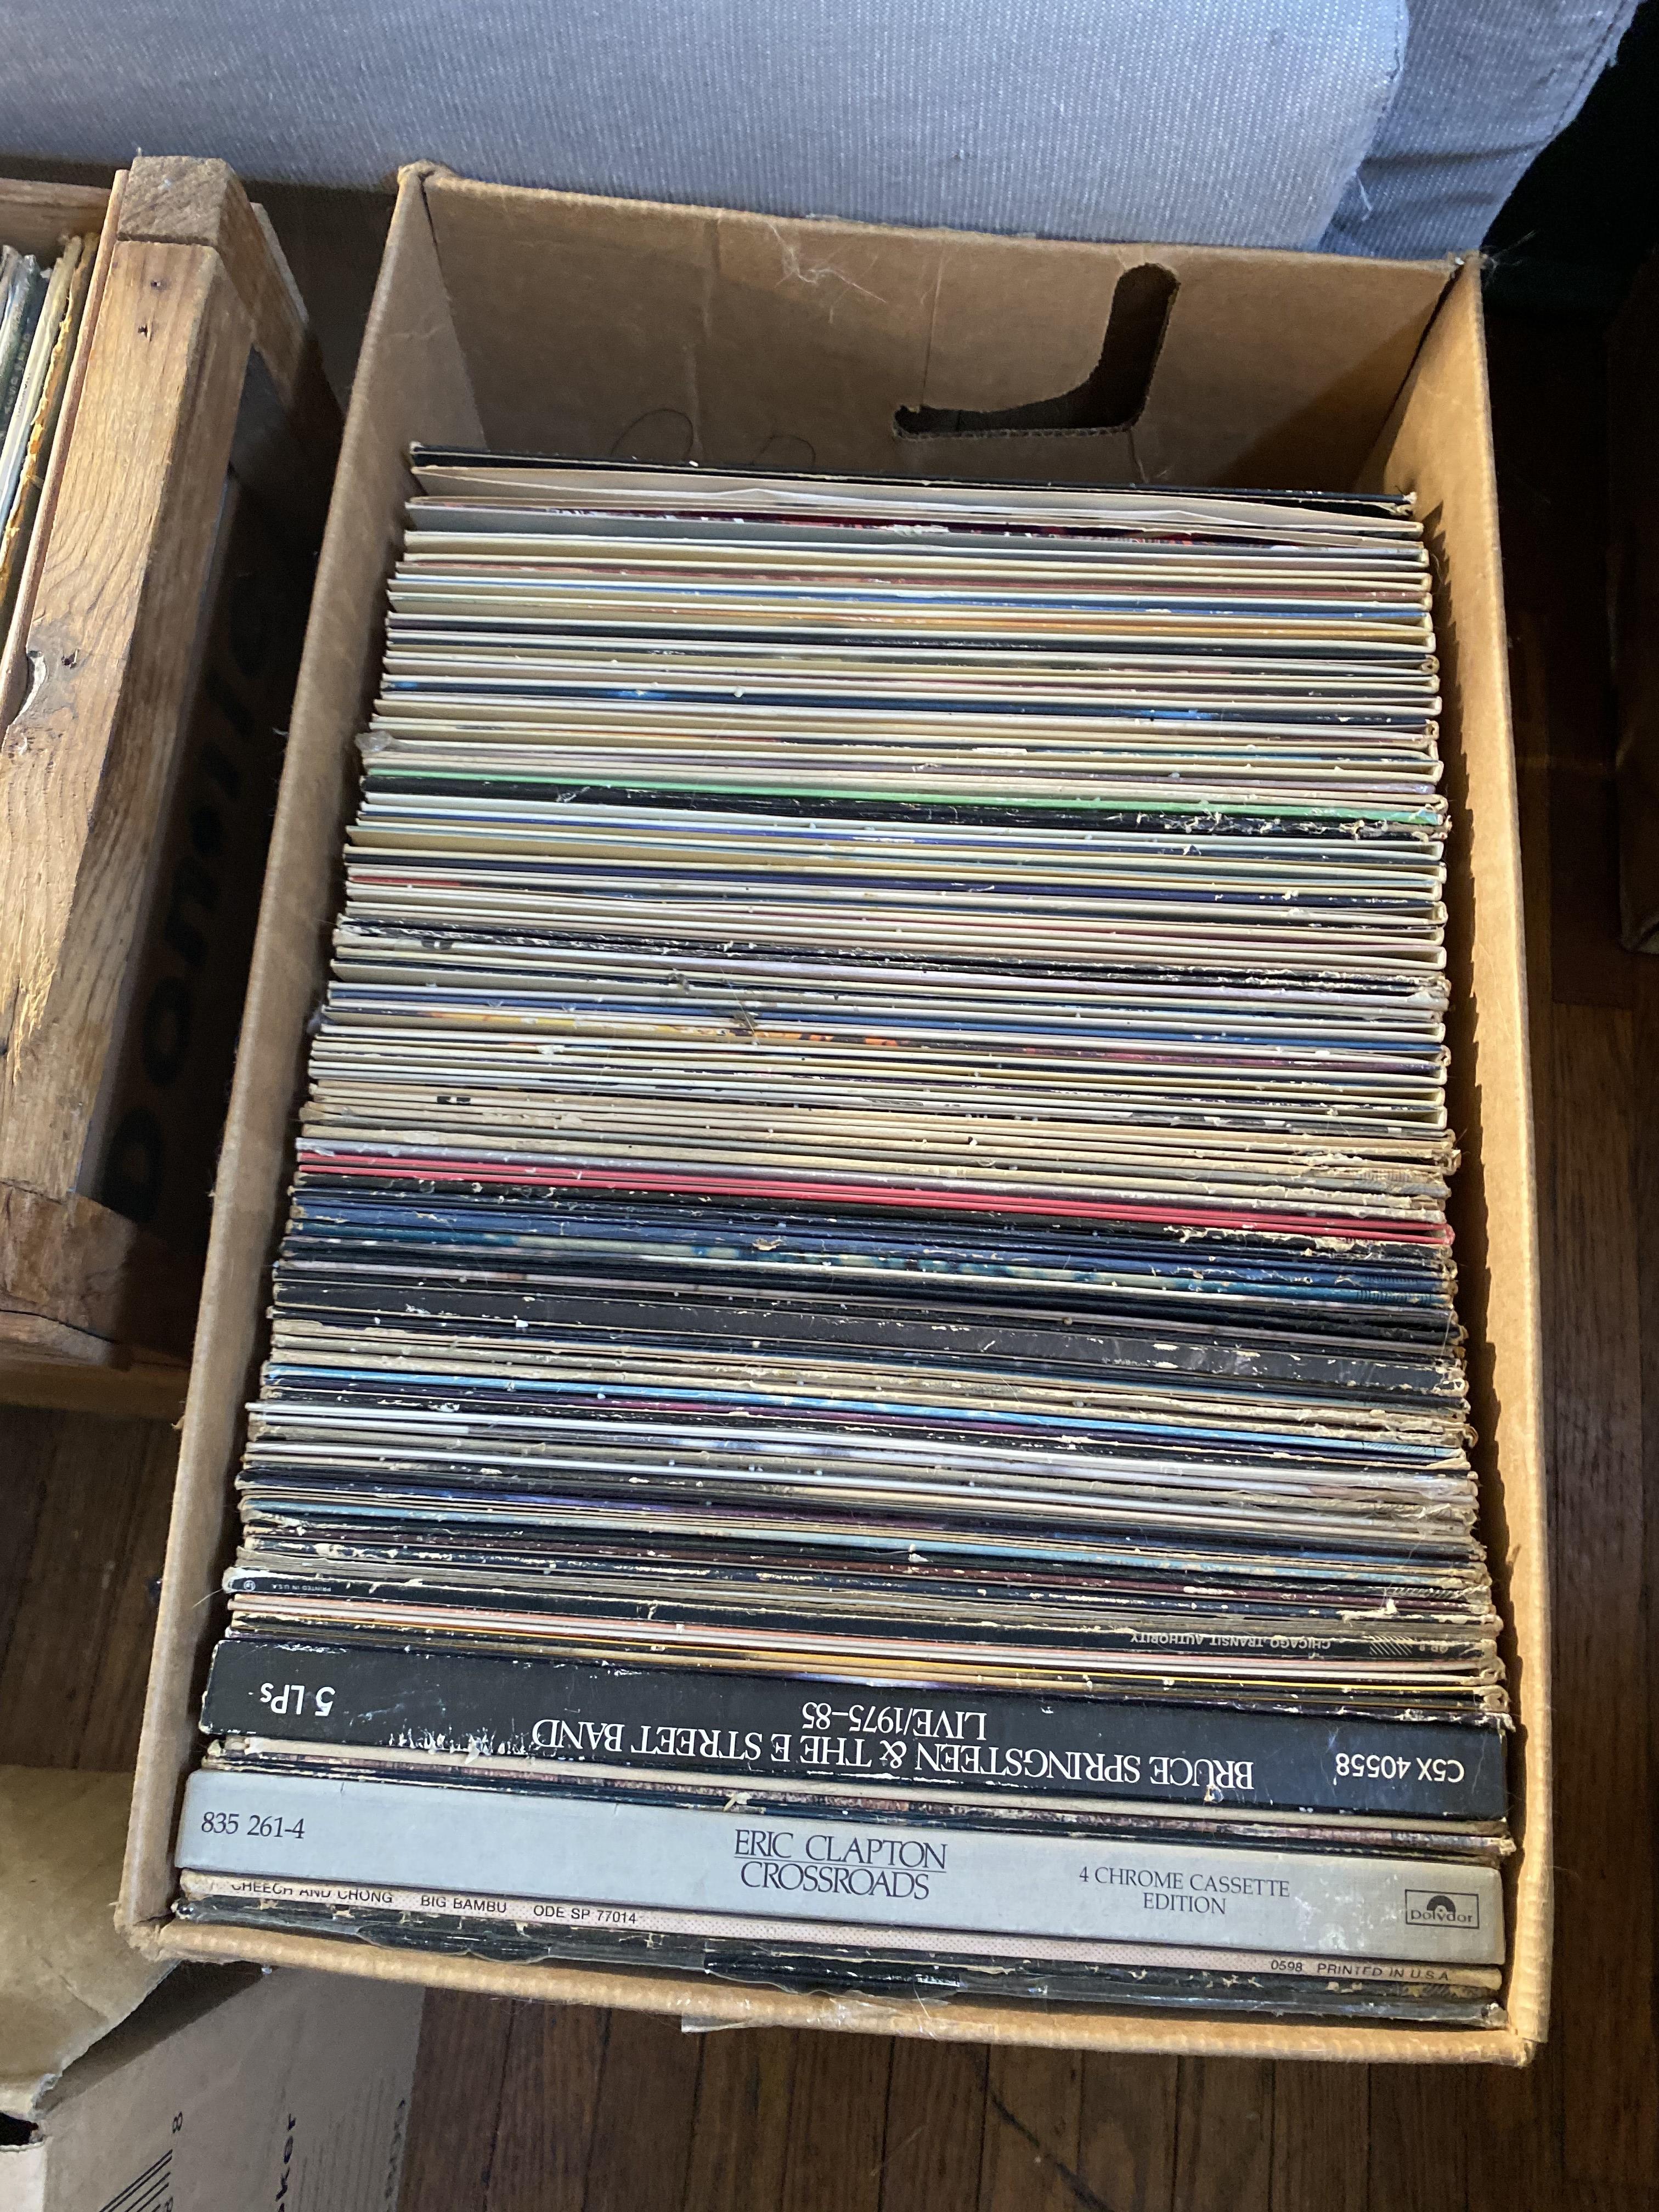 2 large boxes of vintage popular records